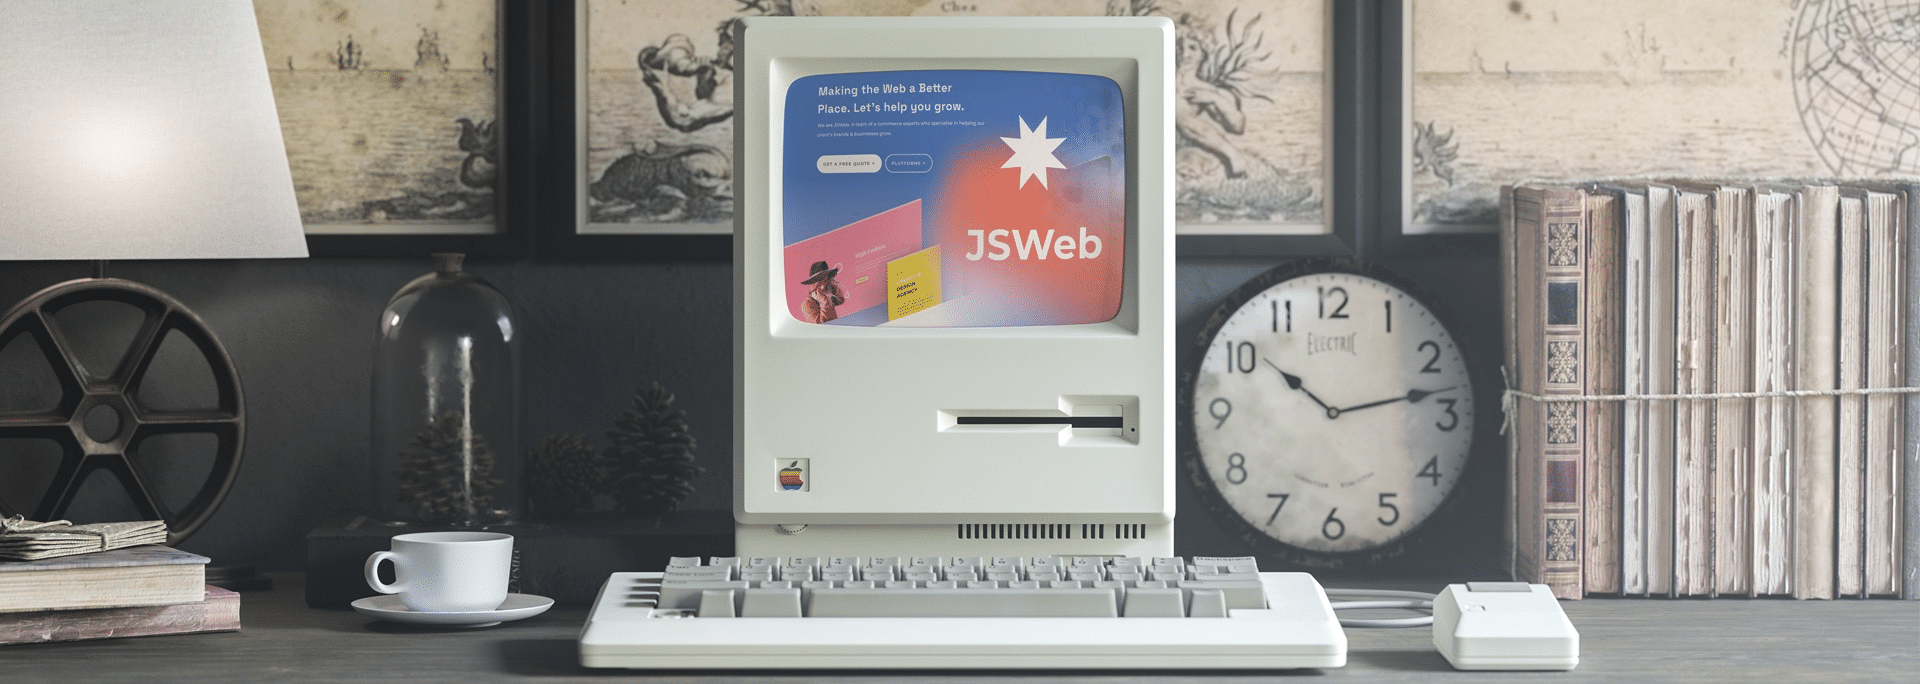 homepage banner showing an old Mac displaying the JSWeb website